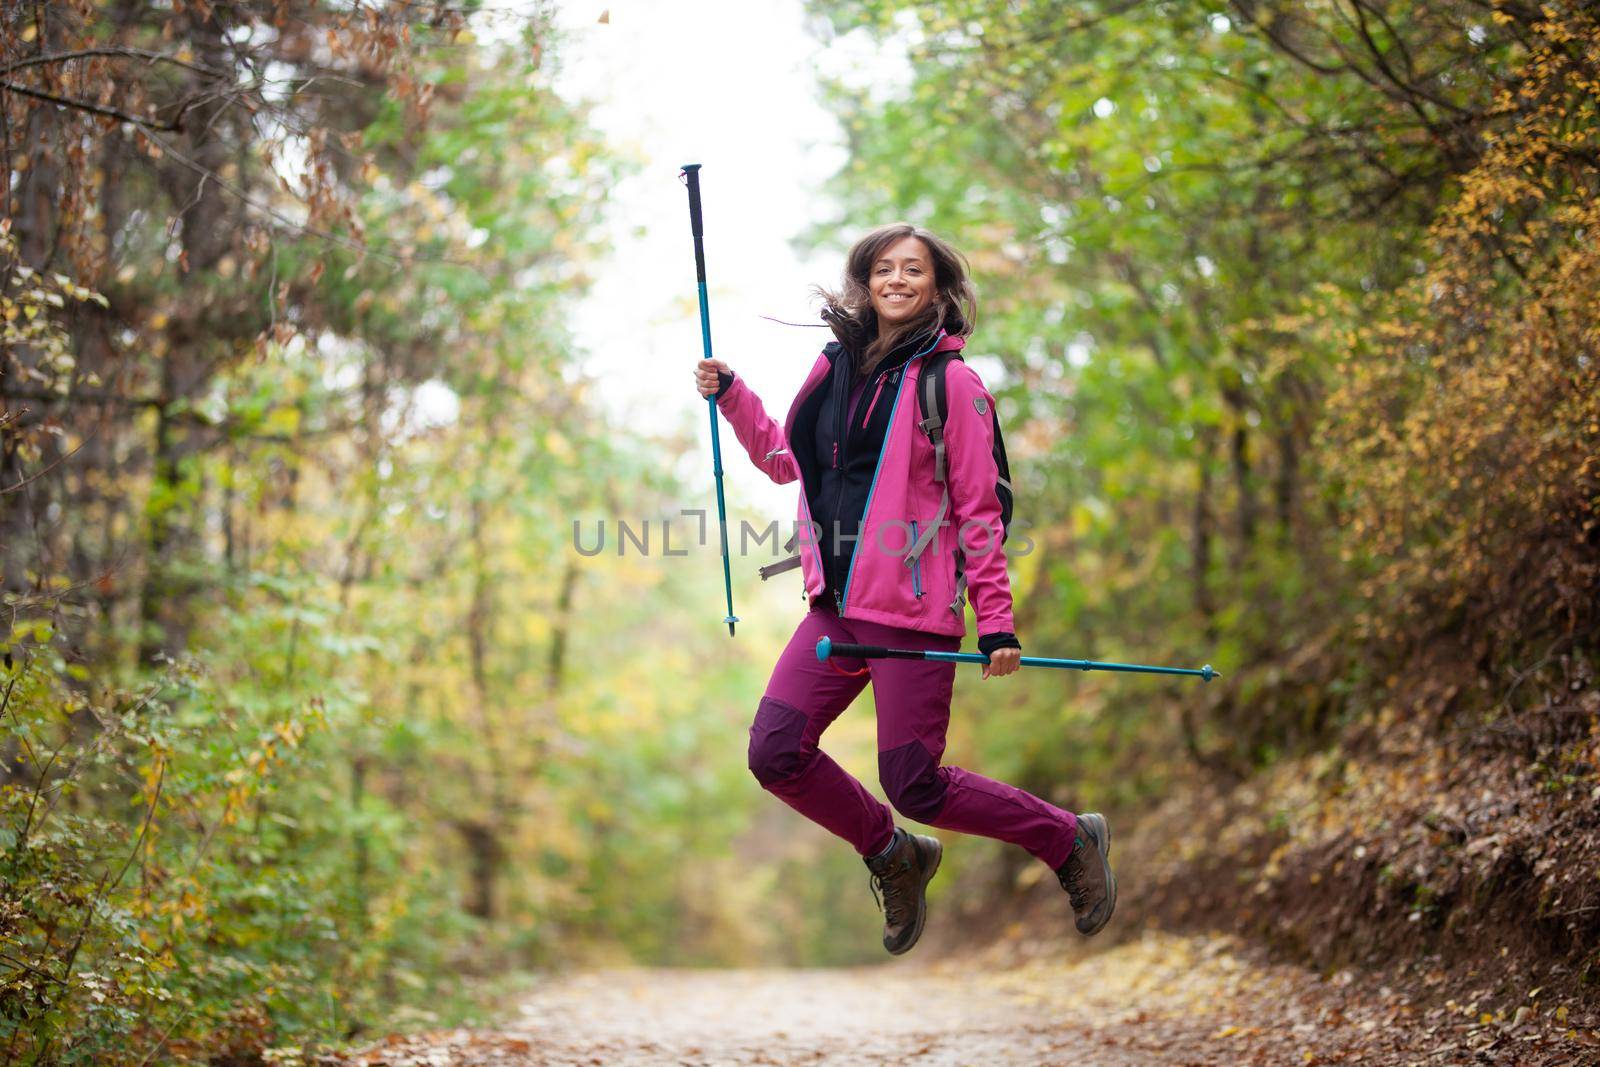 Hiker girl jumping on a trail in the mountains. Backpacker with hiking poles and pink jacket in a forest. Happy lifestyle outdoors.